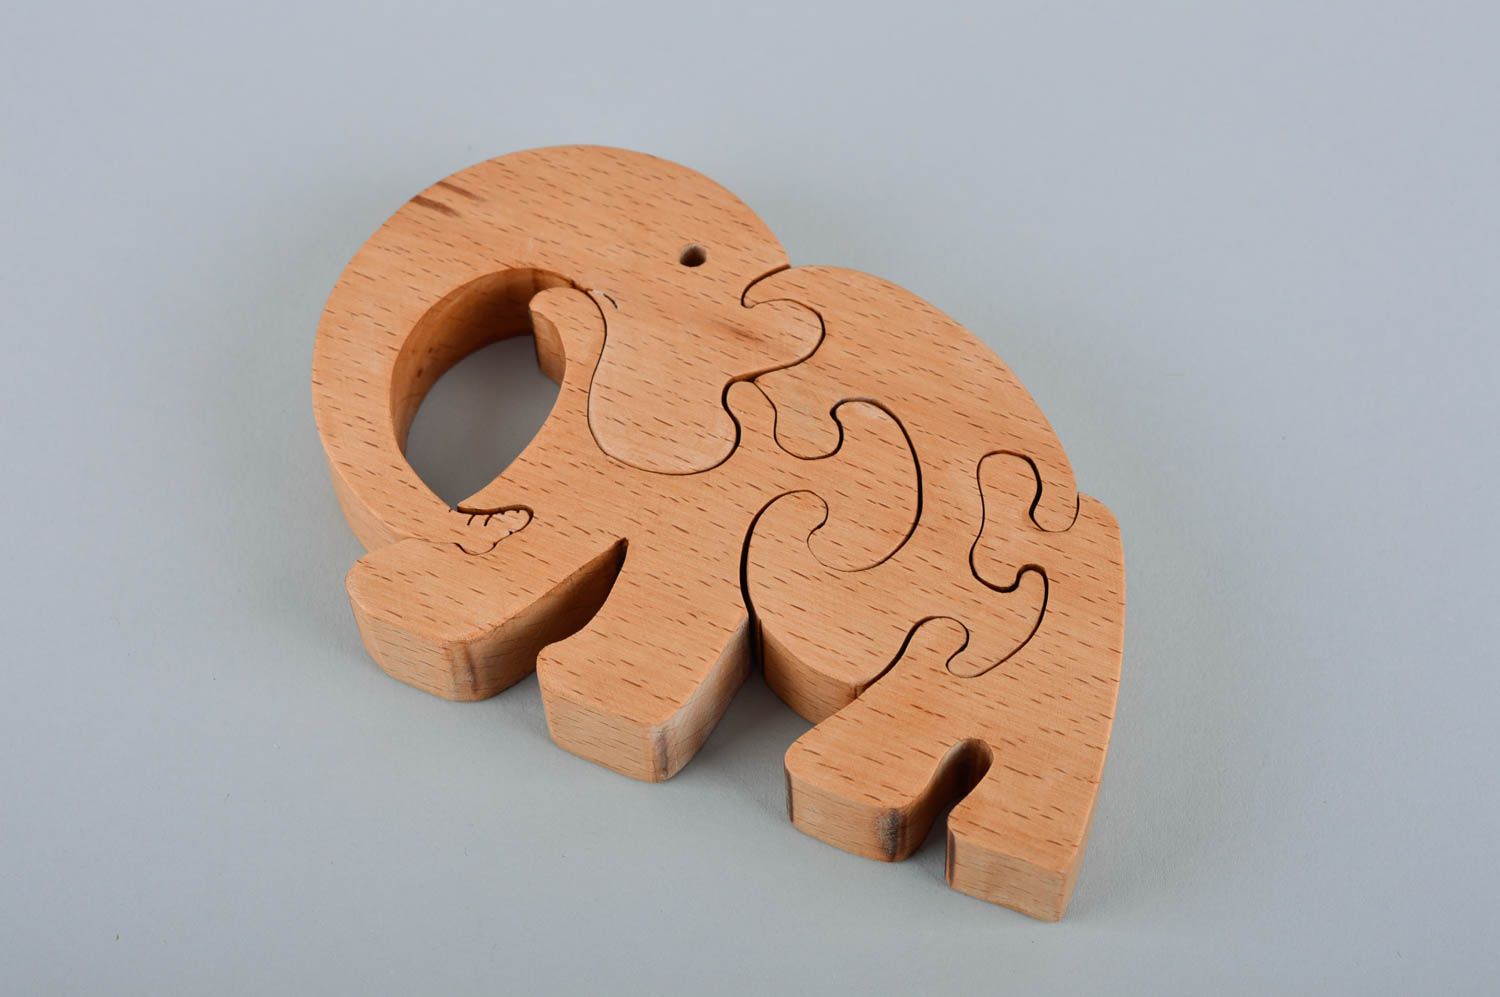 Handmade puzzle wooden puzzle unusual toy for children gift ideas decor ideas photo 4